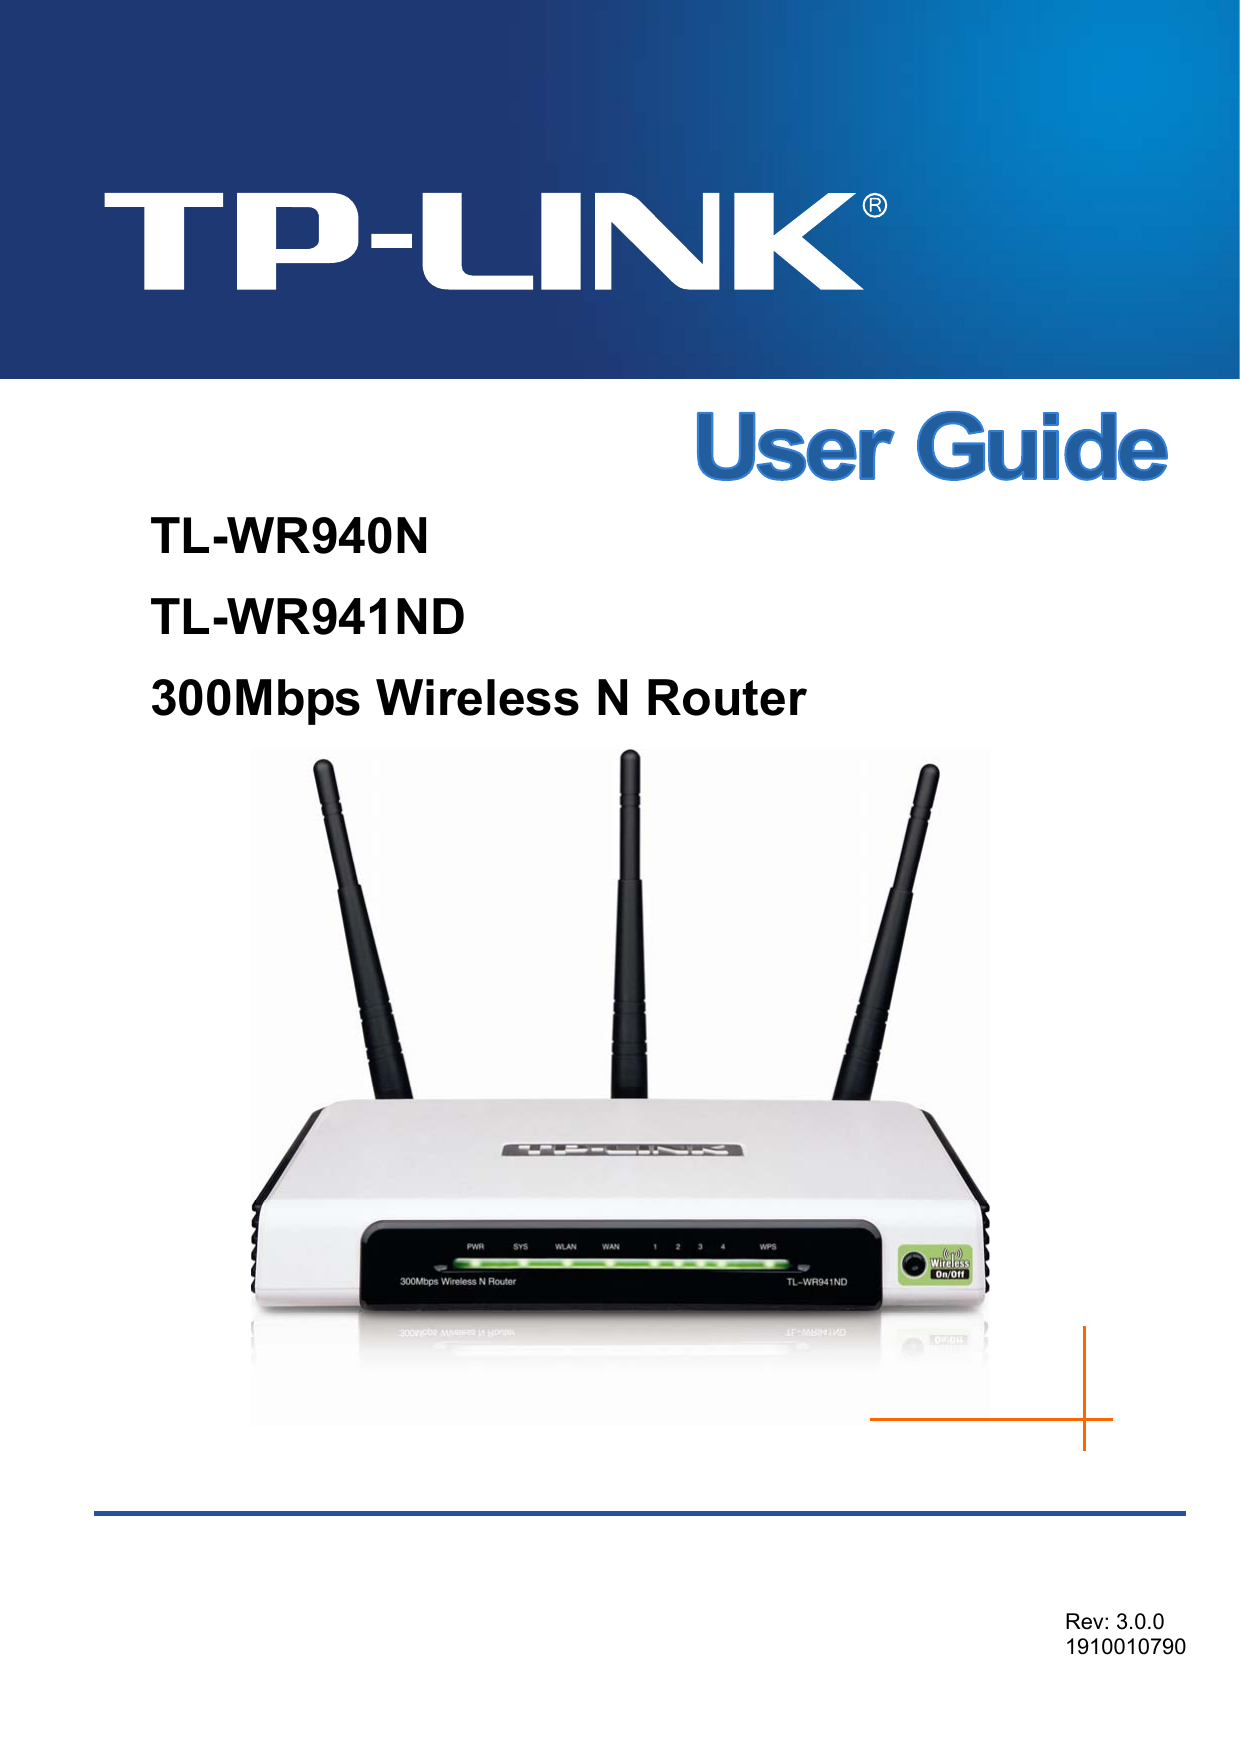   TL-WR940N TL-WR941ND 300Mbps Wireless N Router   Rev: 3.0.0 1910010790    